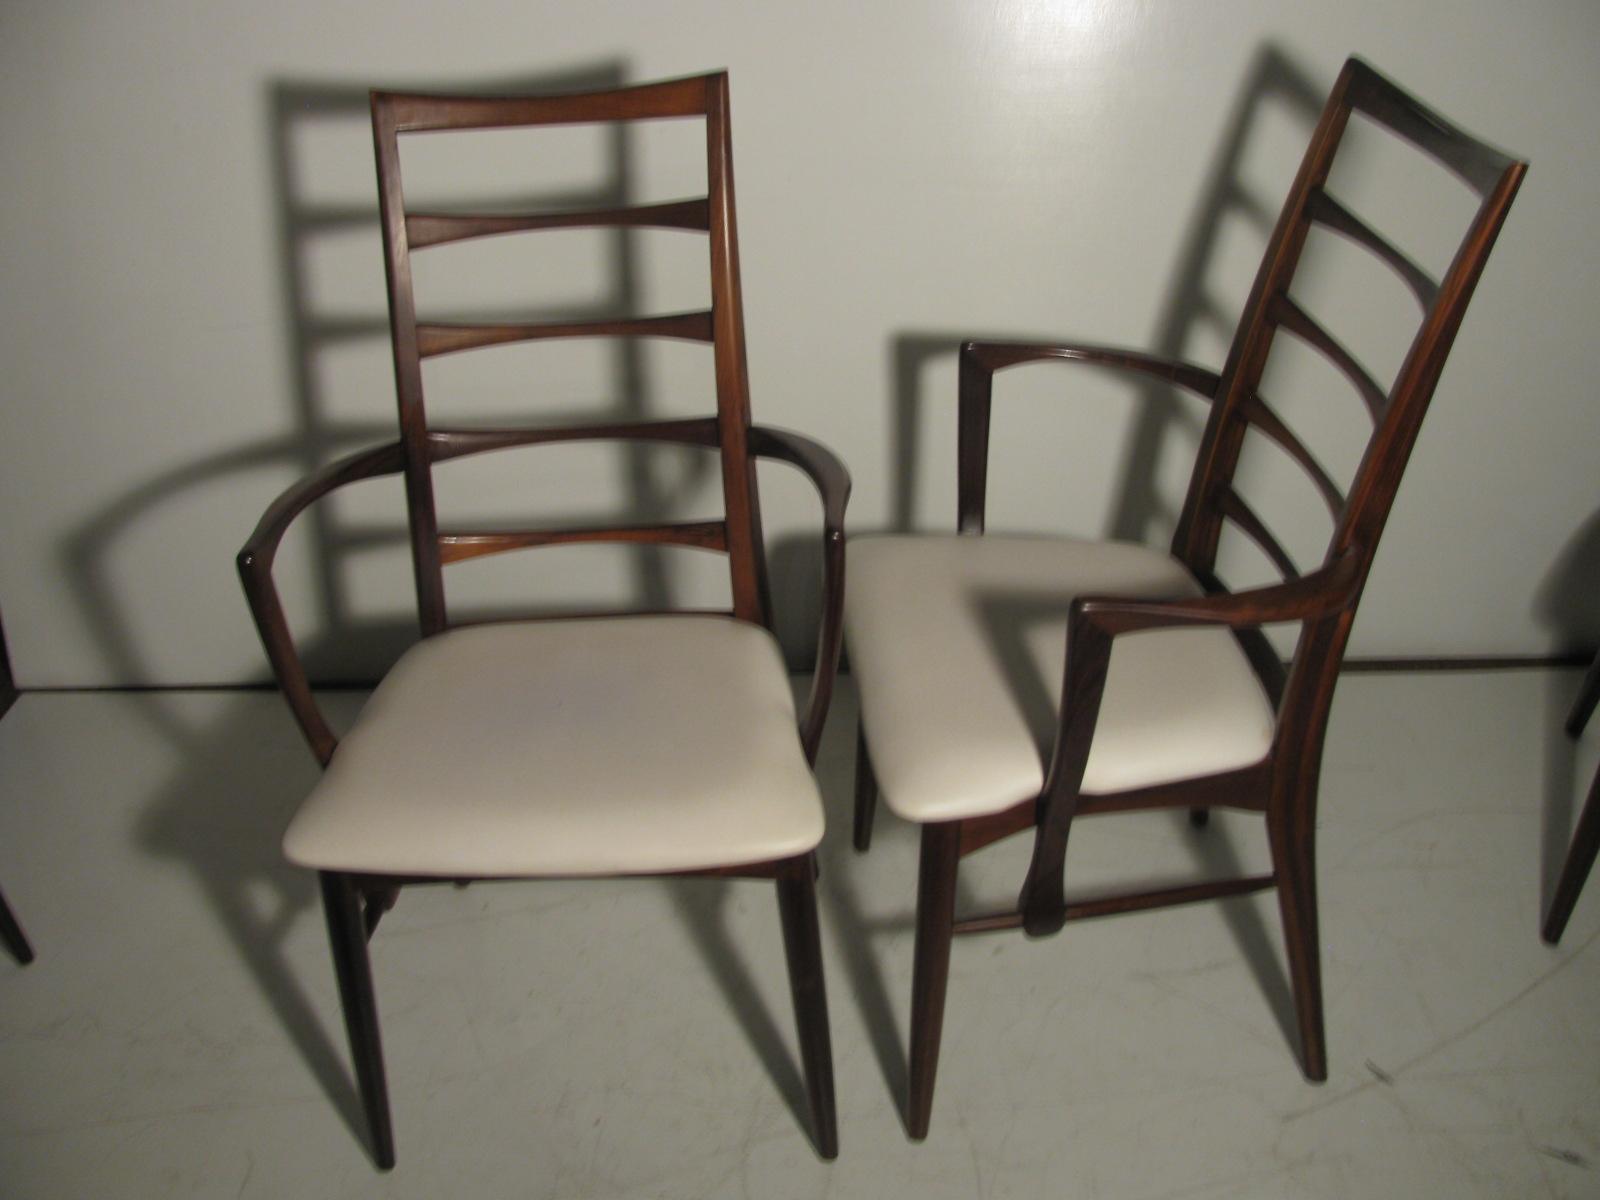 Elegant and beautiful set of six ladder back solid rosewood dining chairs model Lis, with white leather seats. Set consists of two armchairs and four side chairs. All in amazing vintage condition. Designed and manufactured by Niels Koefoed in the